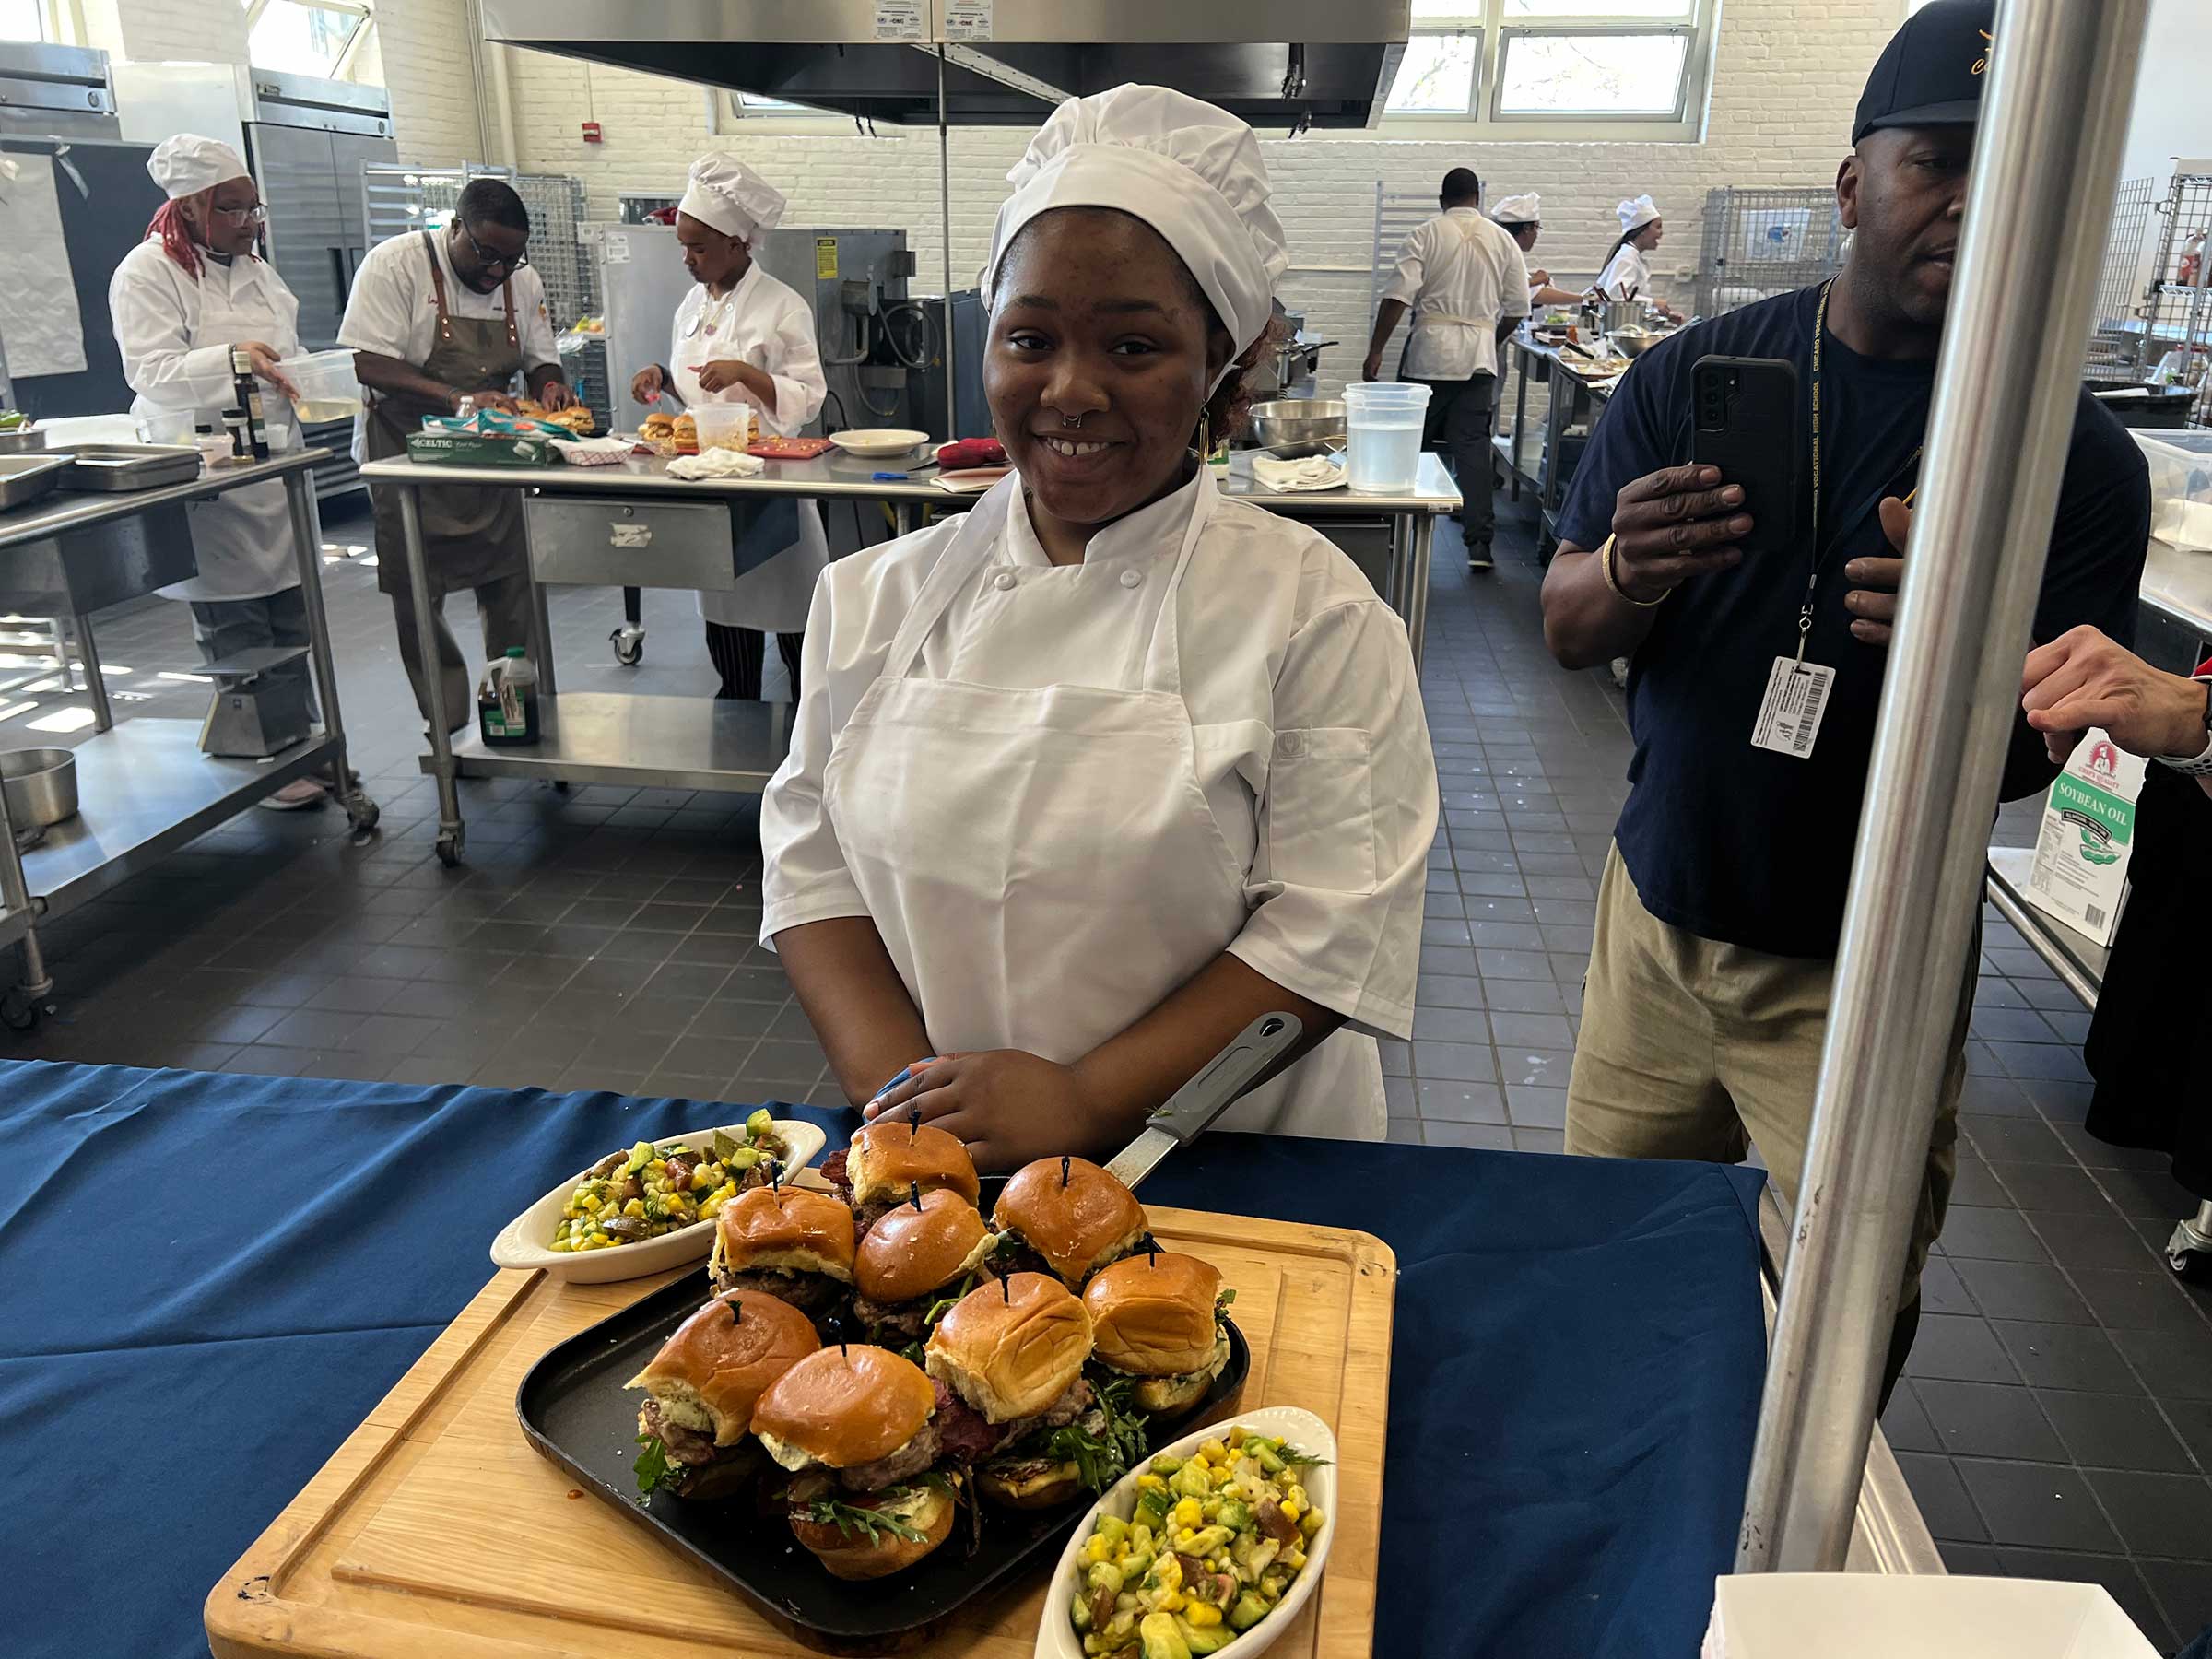 A Chicago Vocational High School student presenting her dish